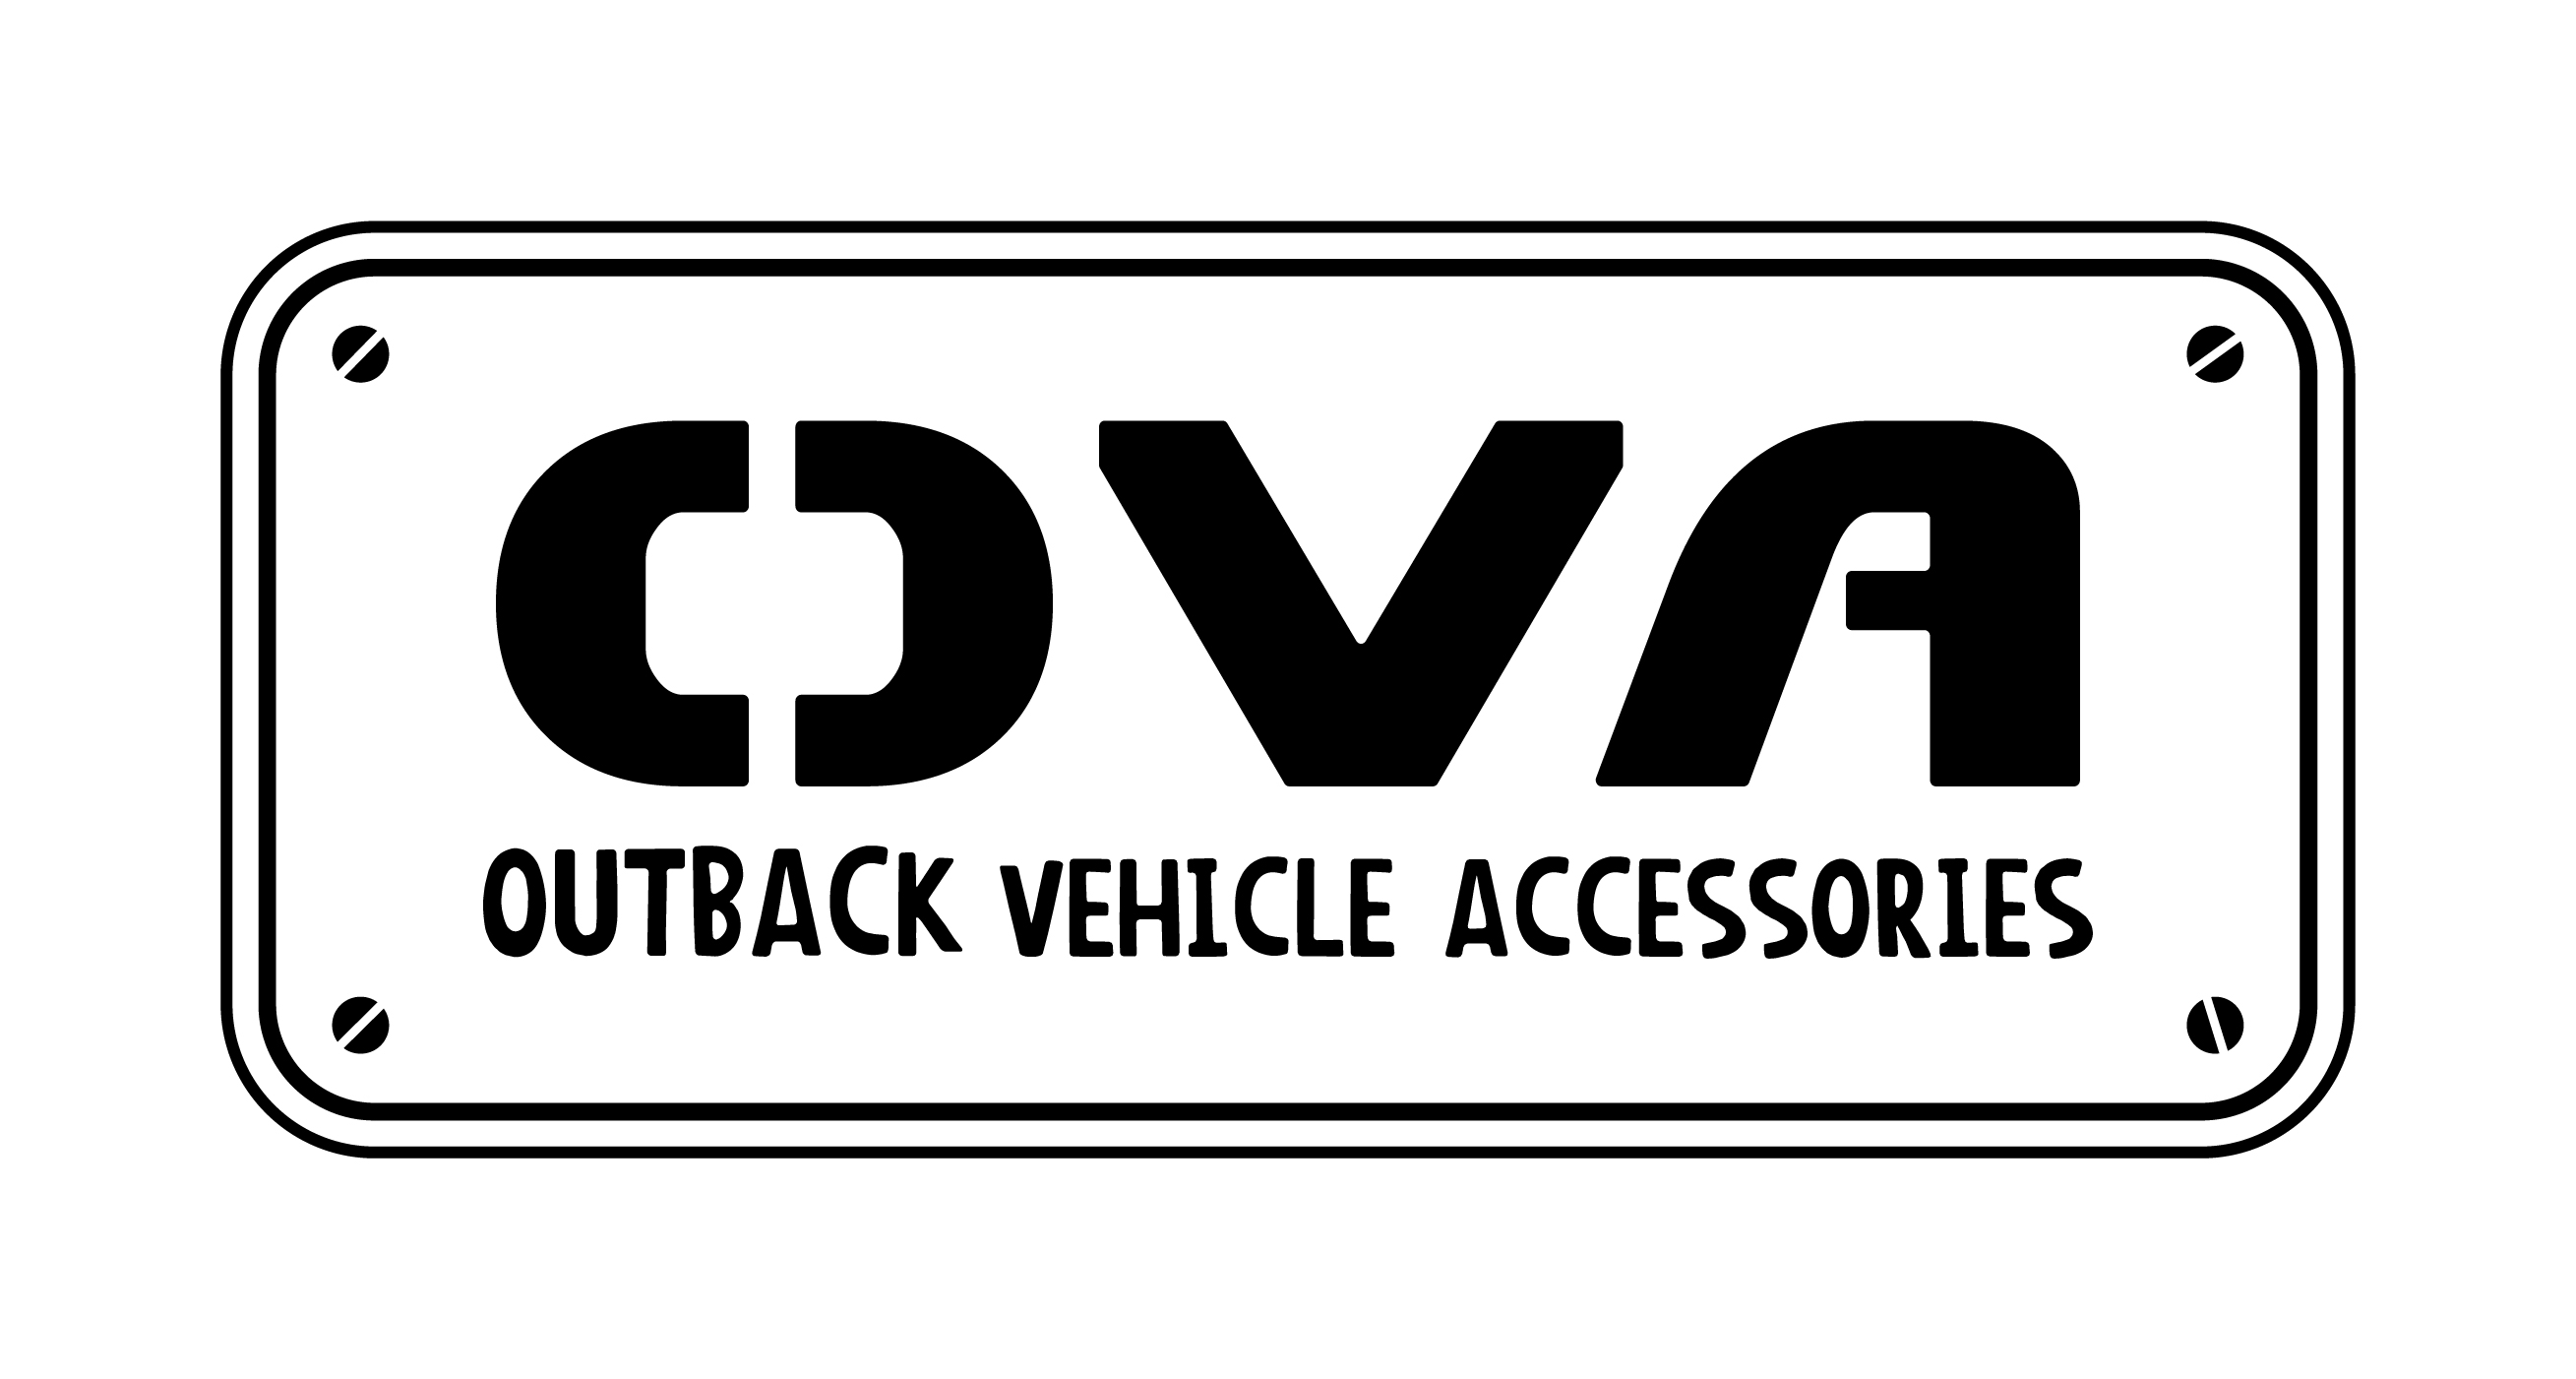 OUTBACK VEHICLE ACCESSORIES